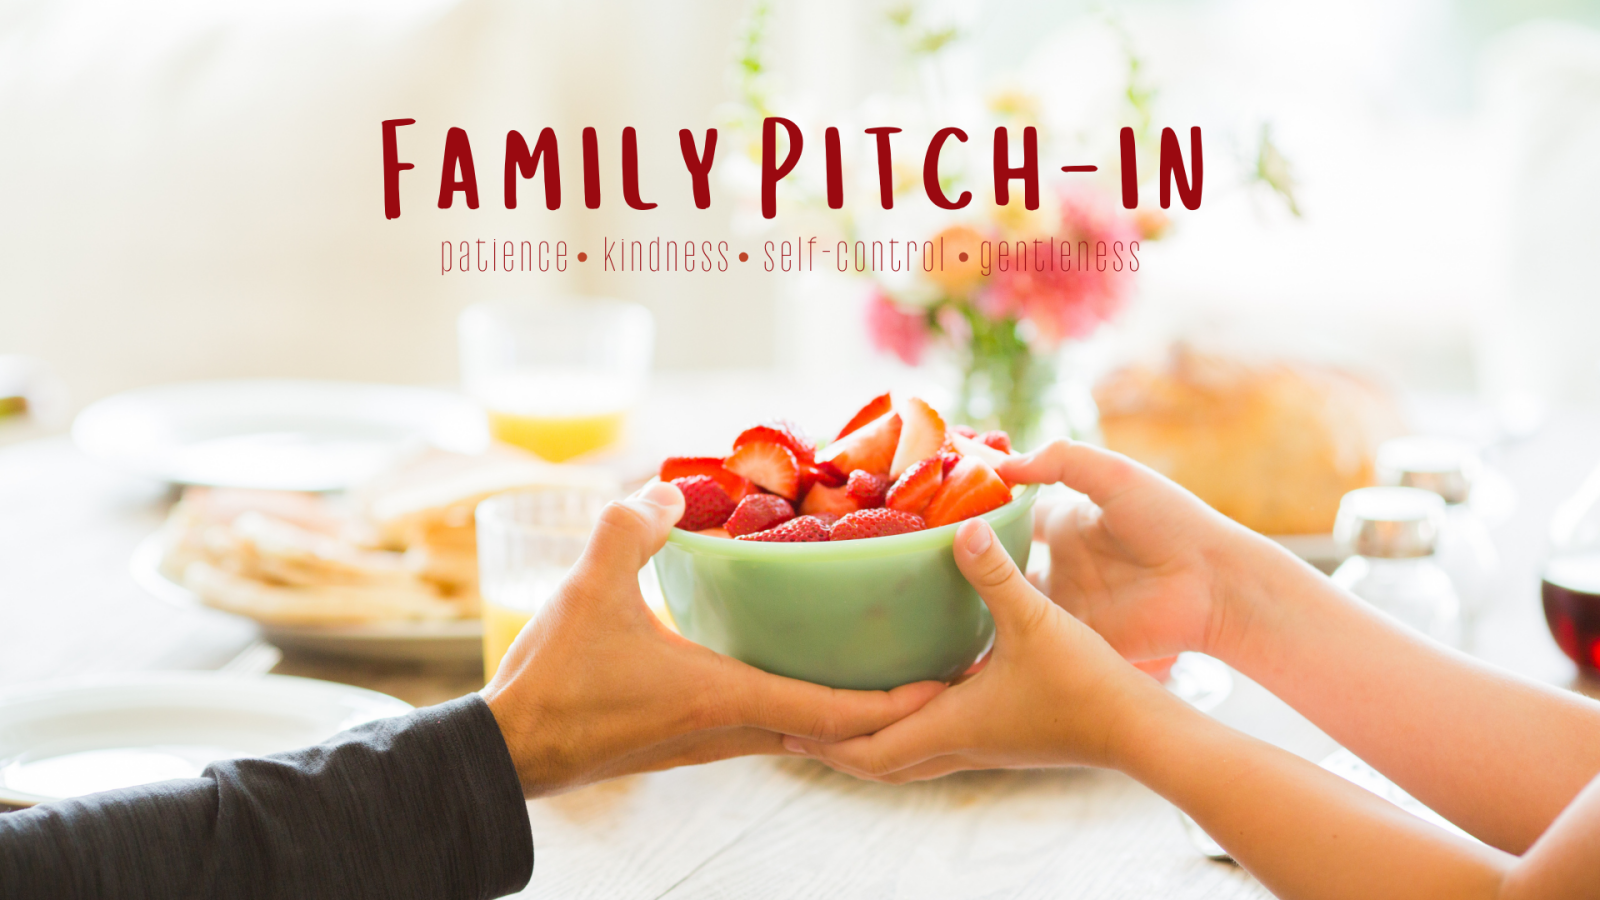 Family Pitch-in